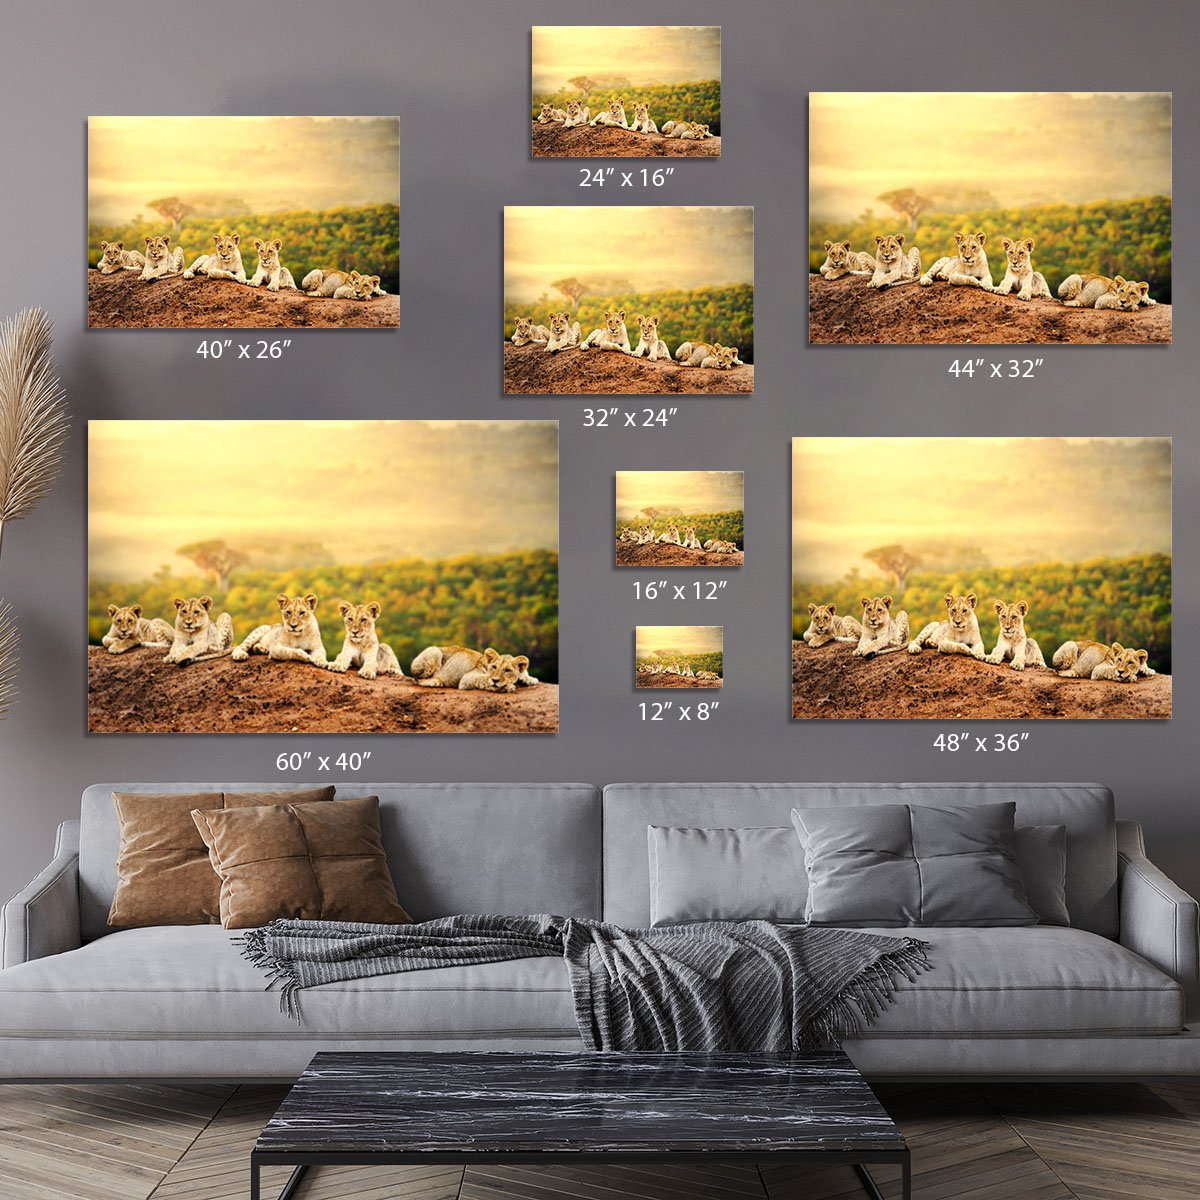 Close up of lion cubs laying together Canvas Print or Poster